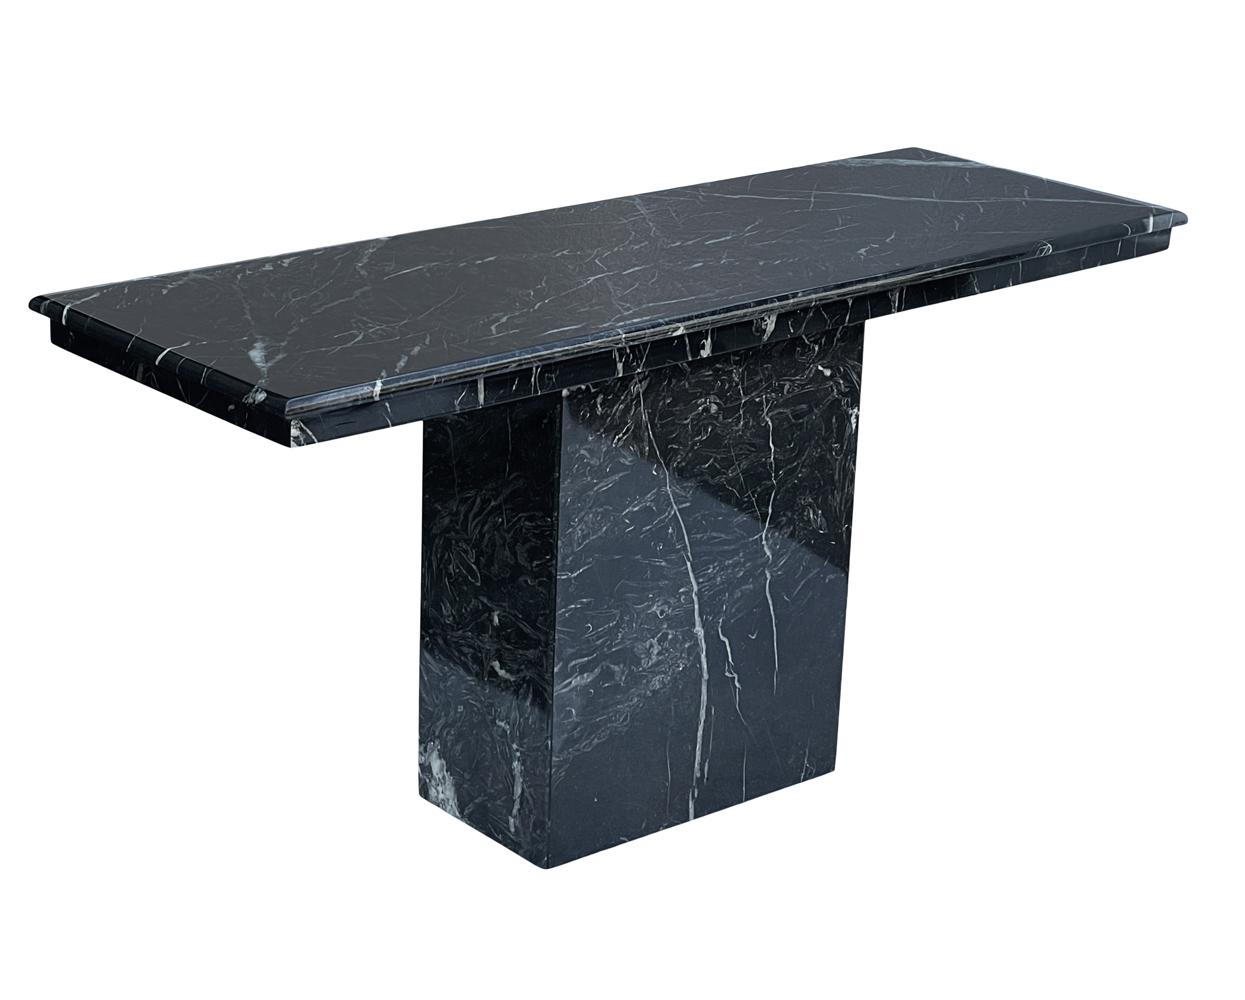 A sleek and modern console or sofa table from Italy circa 1980's. It features glossy black marble with veining. Very good condition.